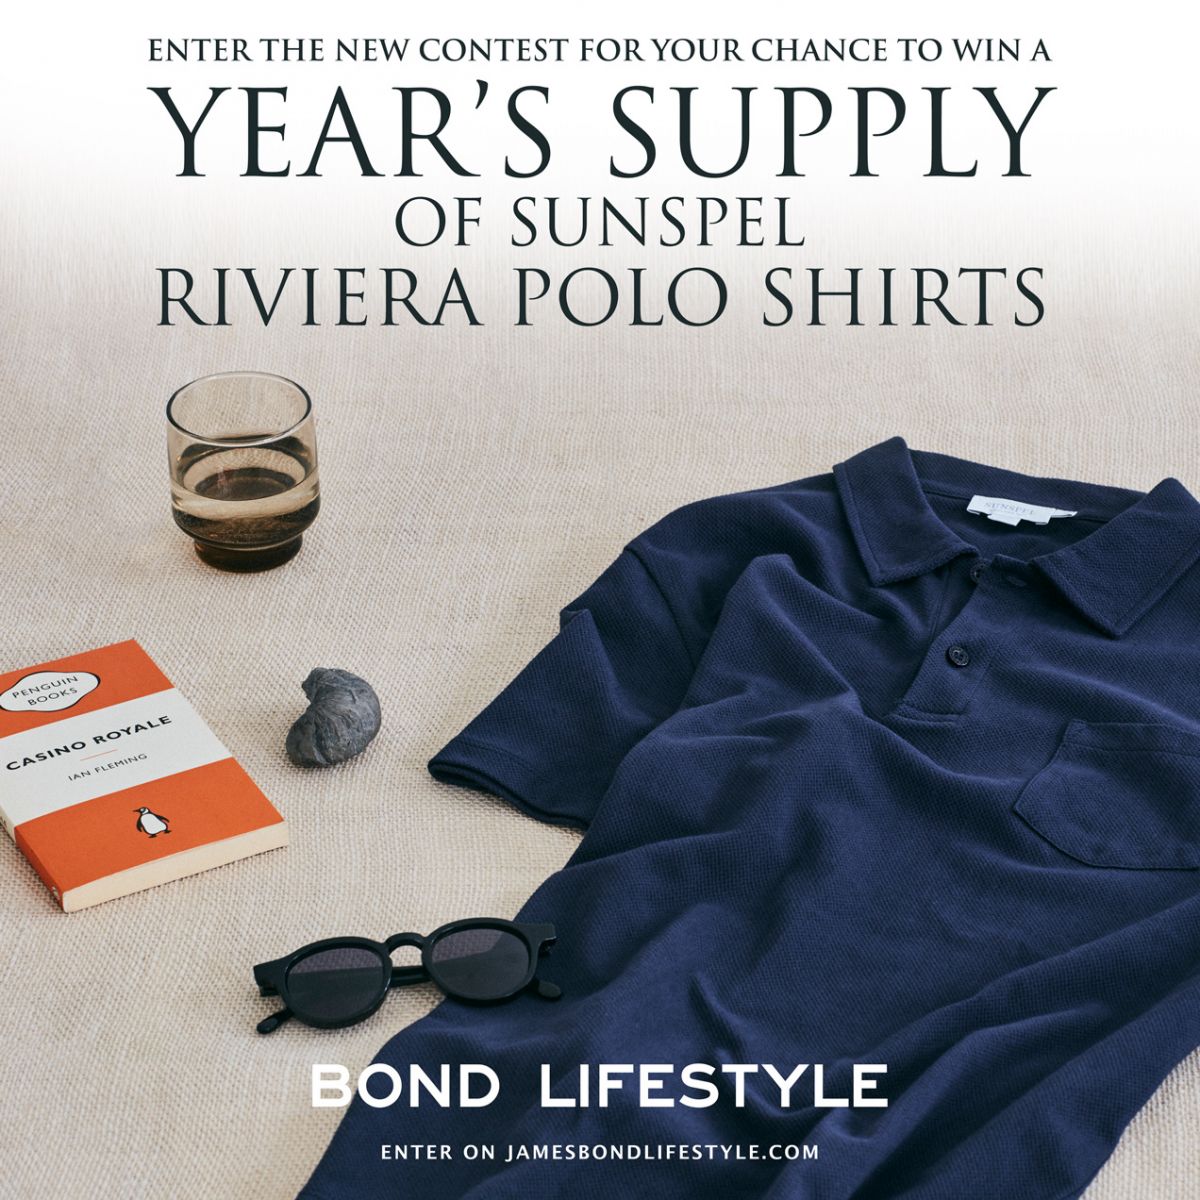 bond lifestyle sunspel competition 2 march 2018